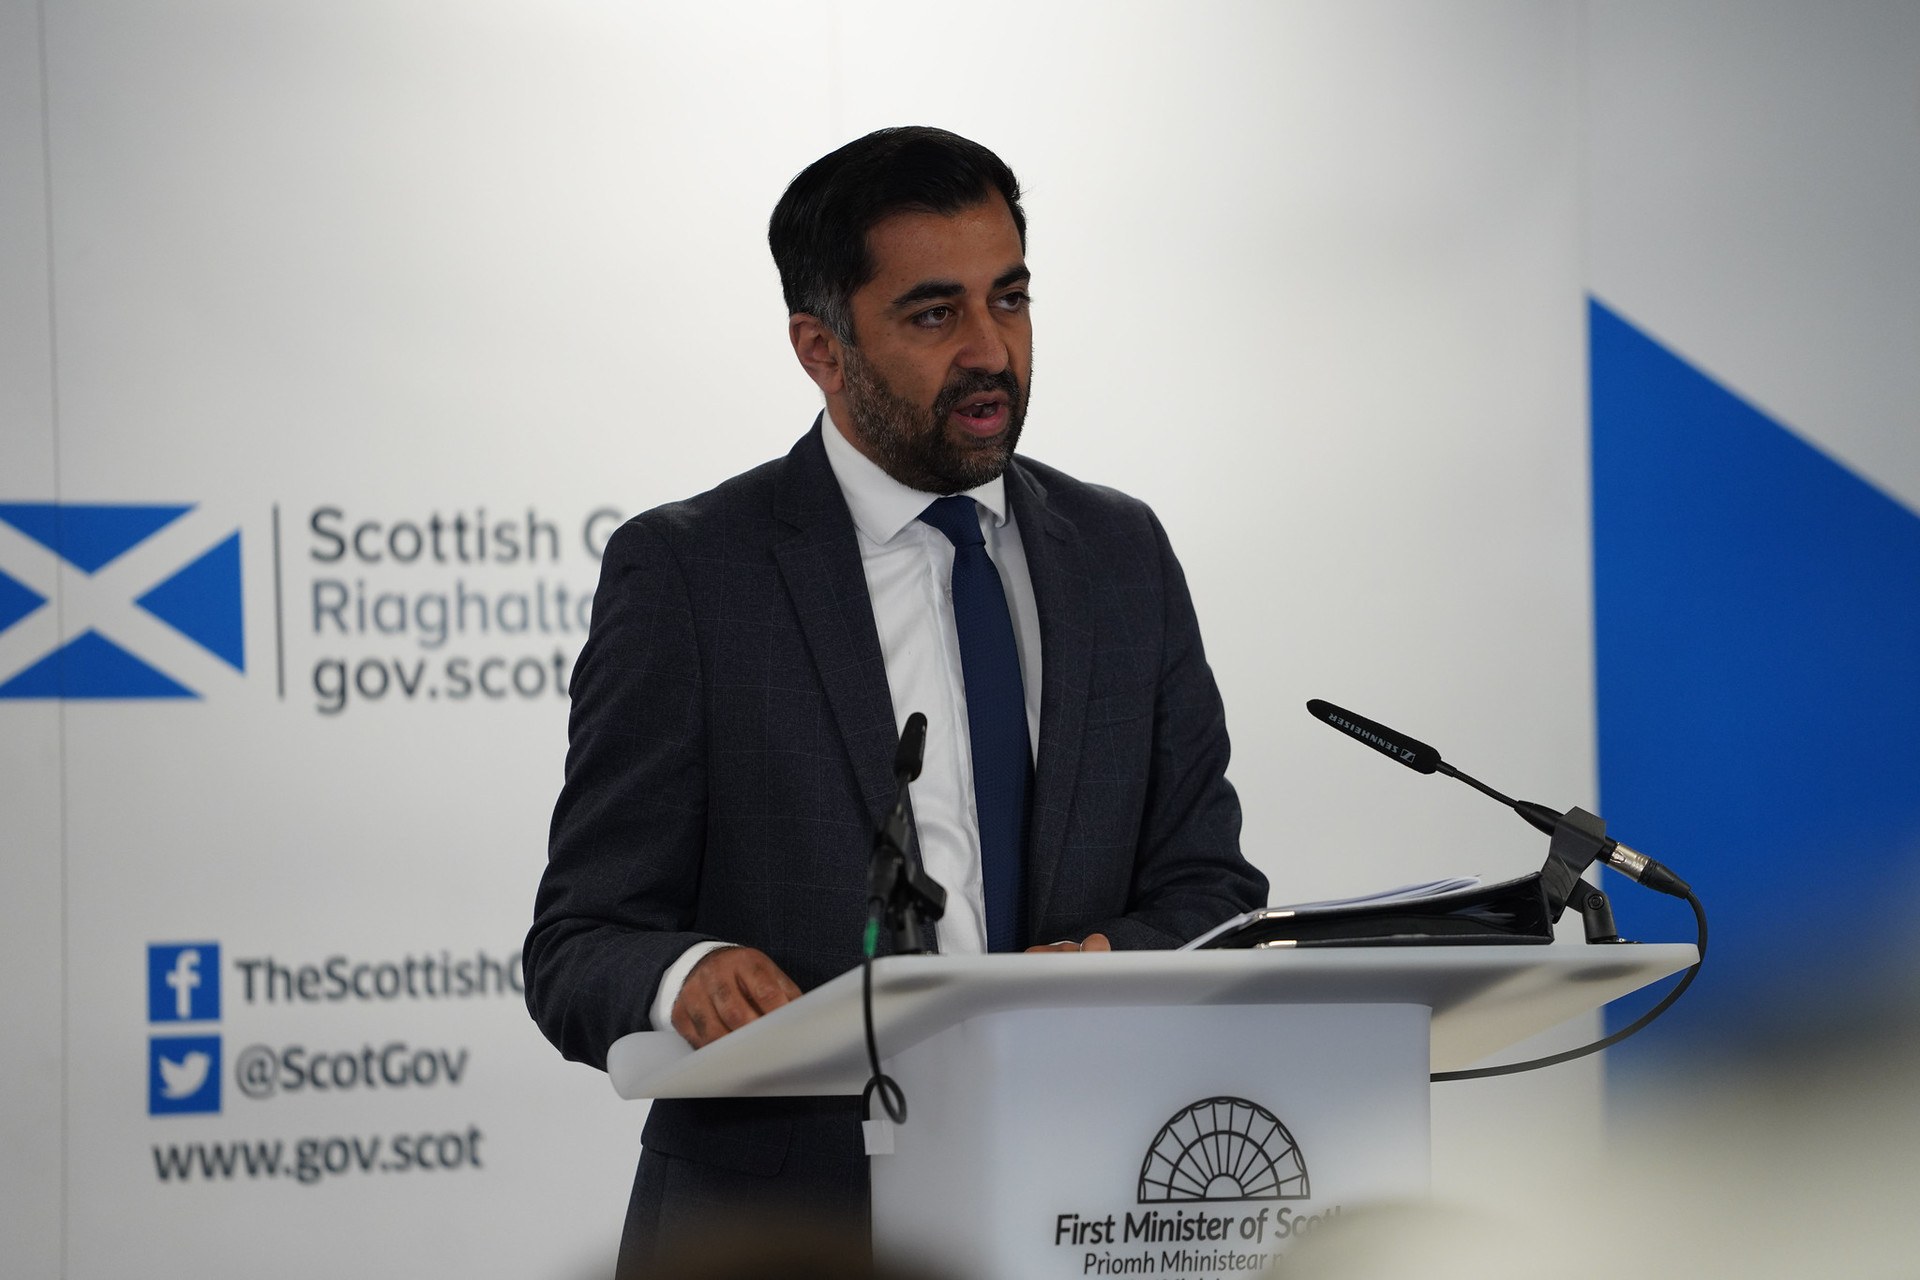 Humza Yousaf said the Labour life peer said 'the quiet part out loud'.